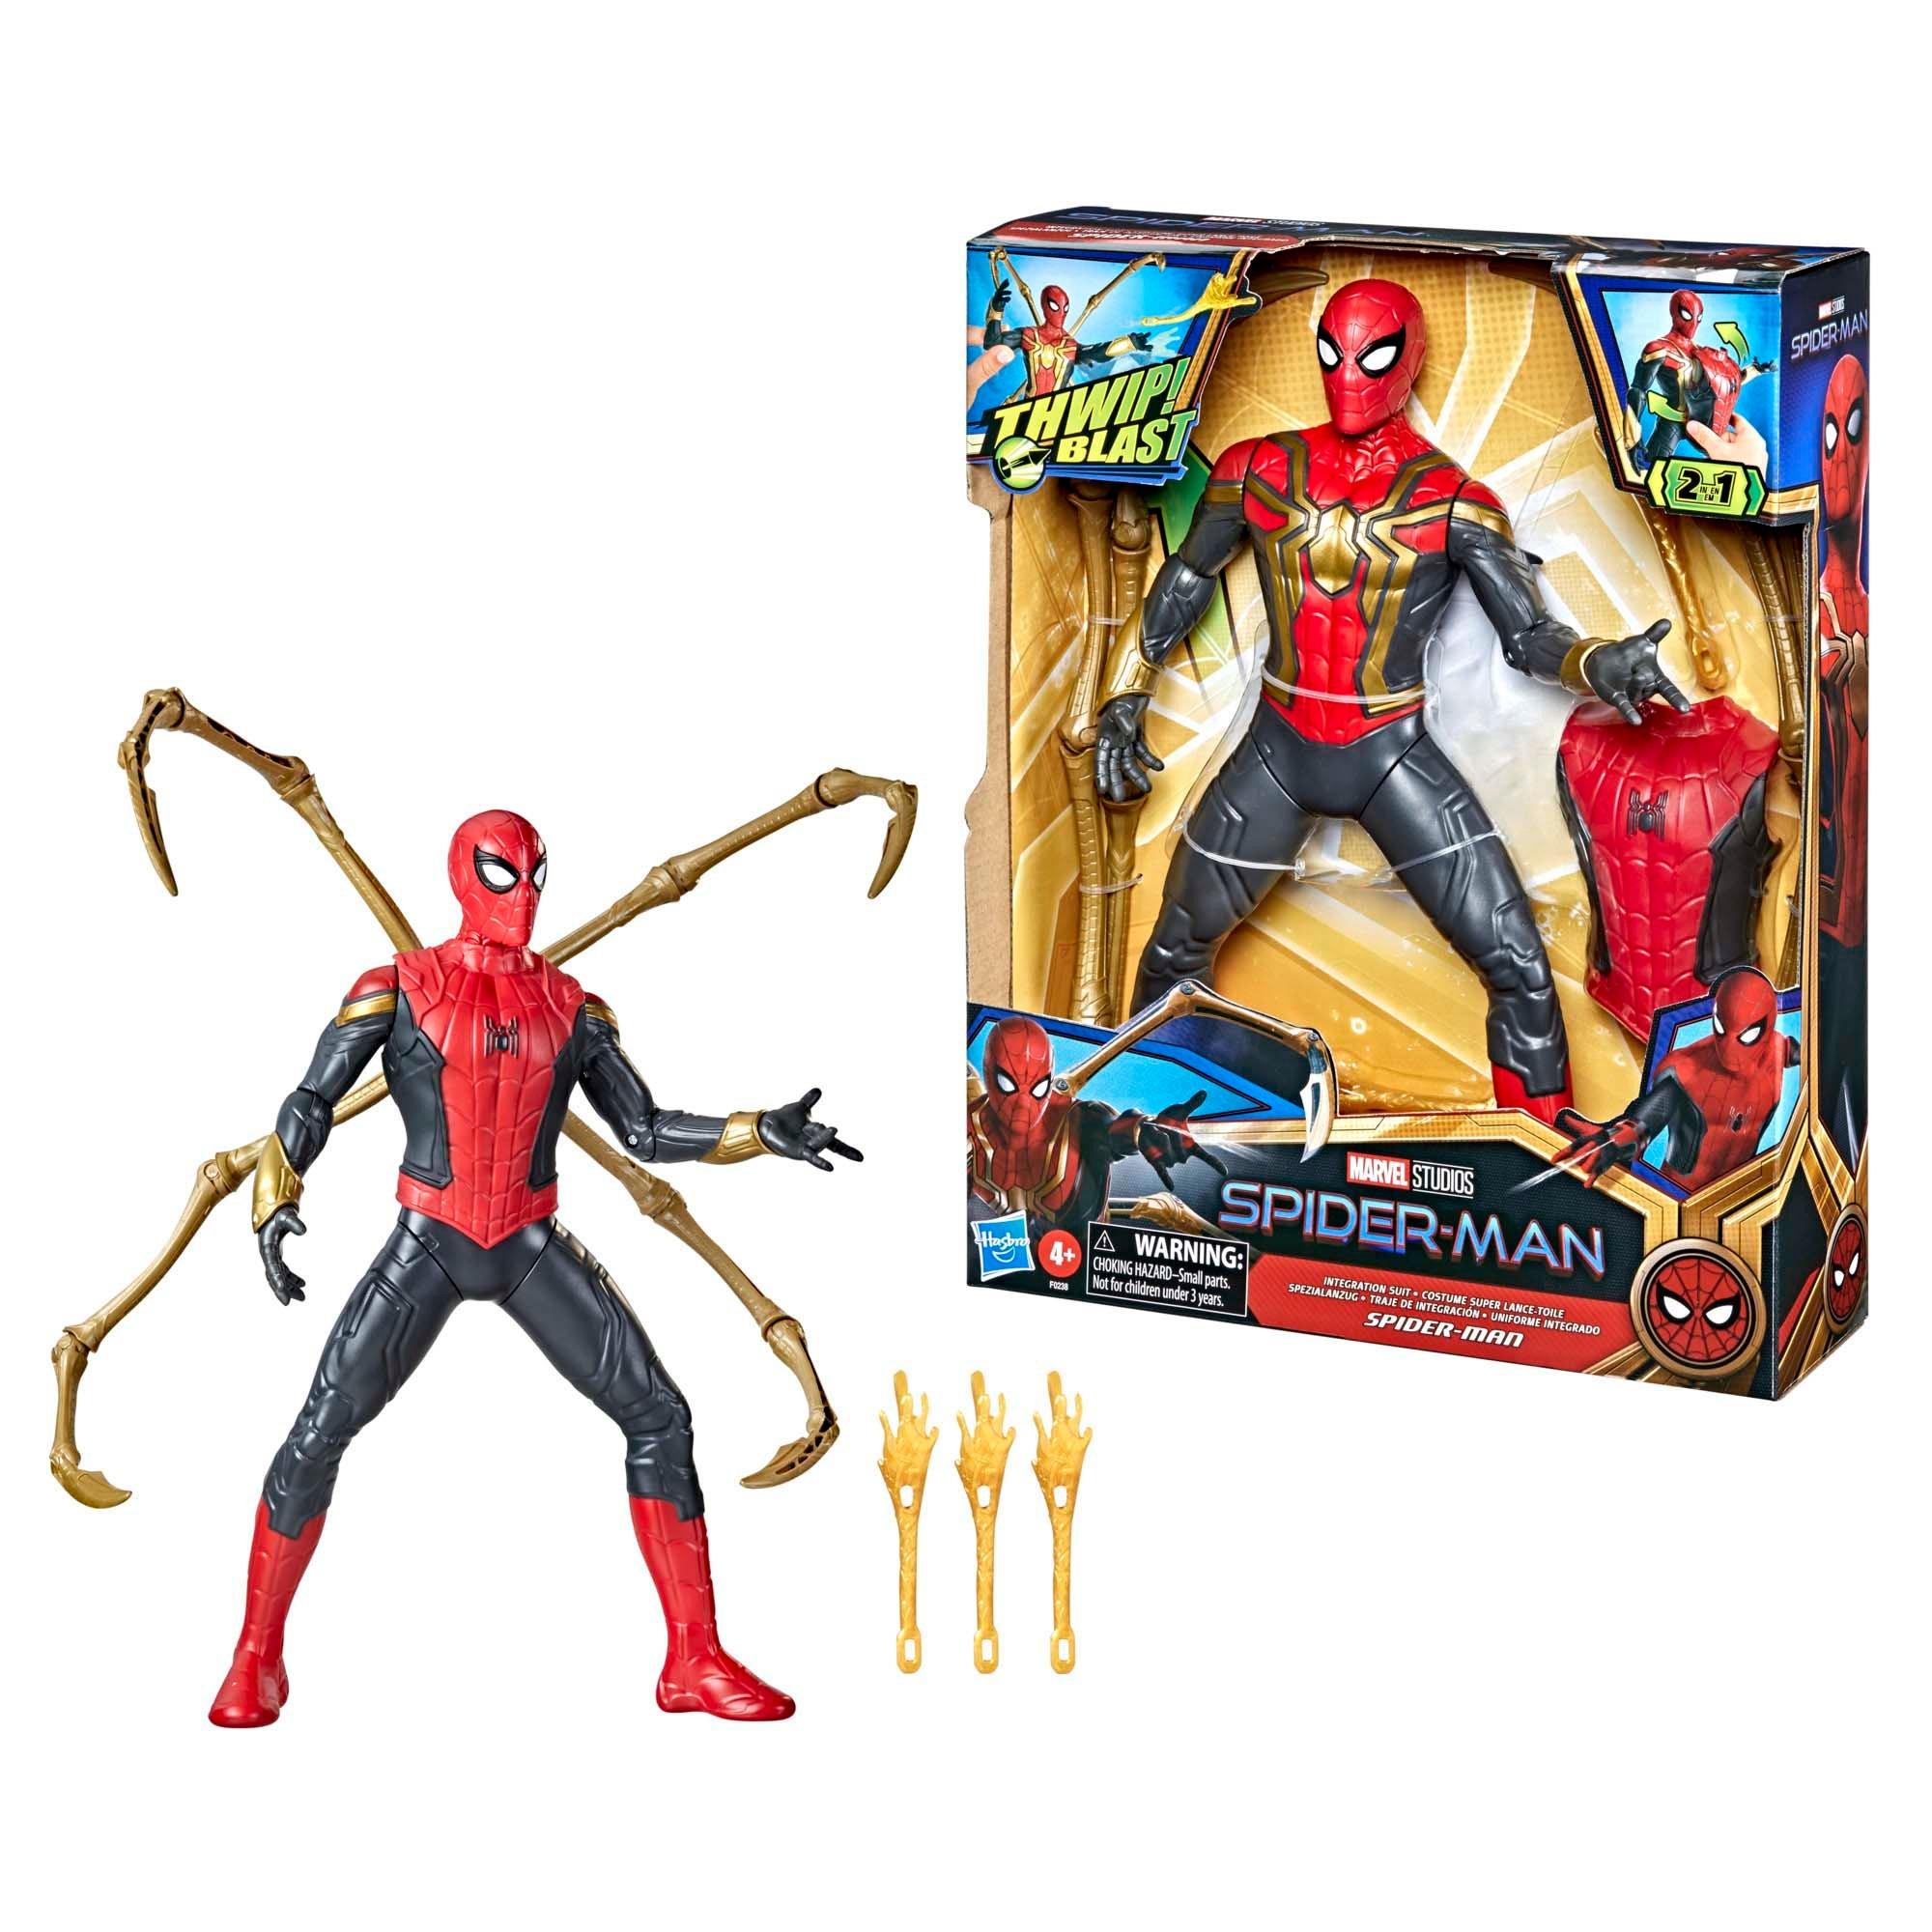 Marvel Infinity War Avengers Iron Spider Spiderman w/ Tentacles 6" Action Figure 